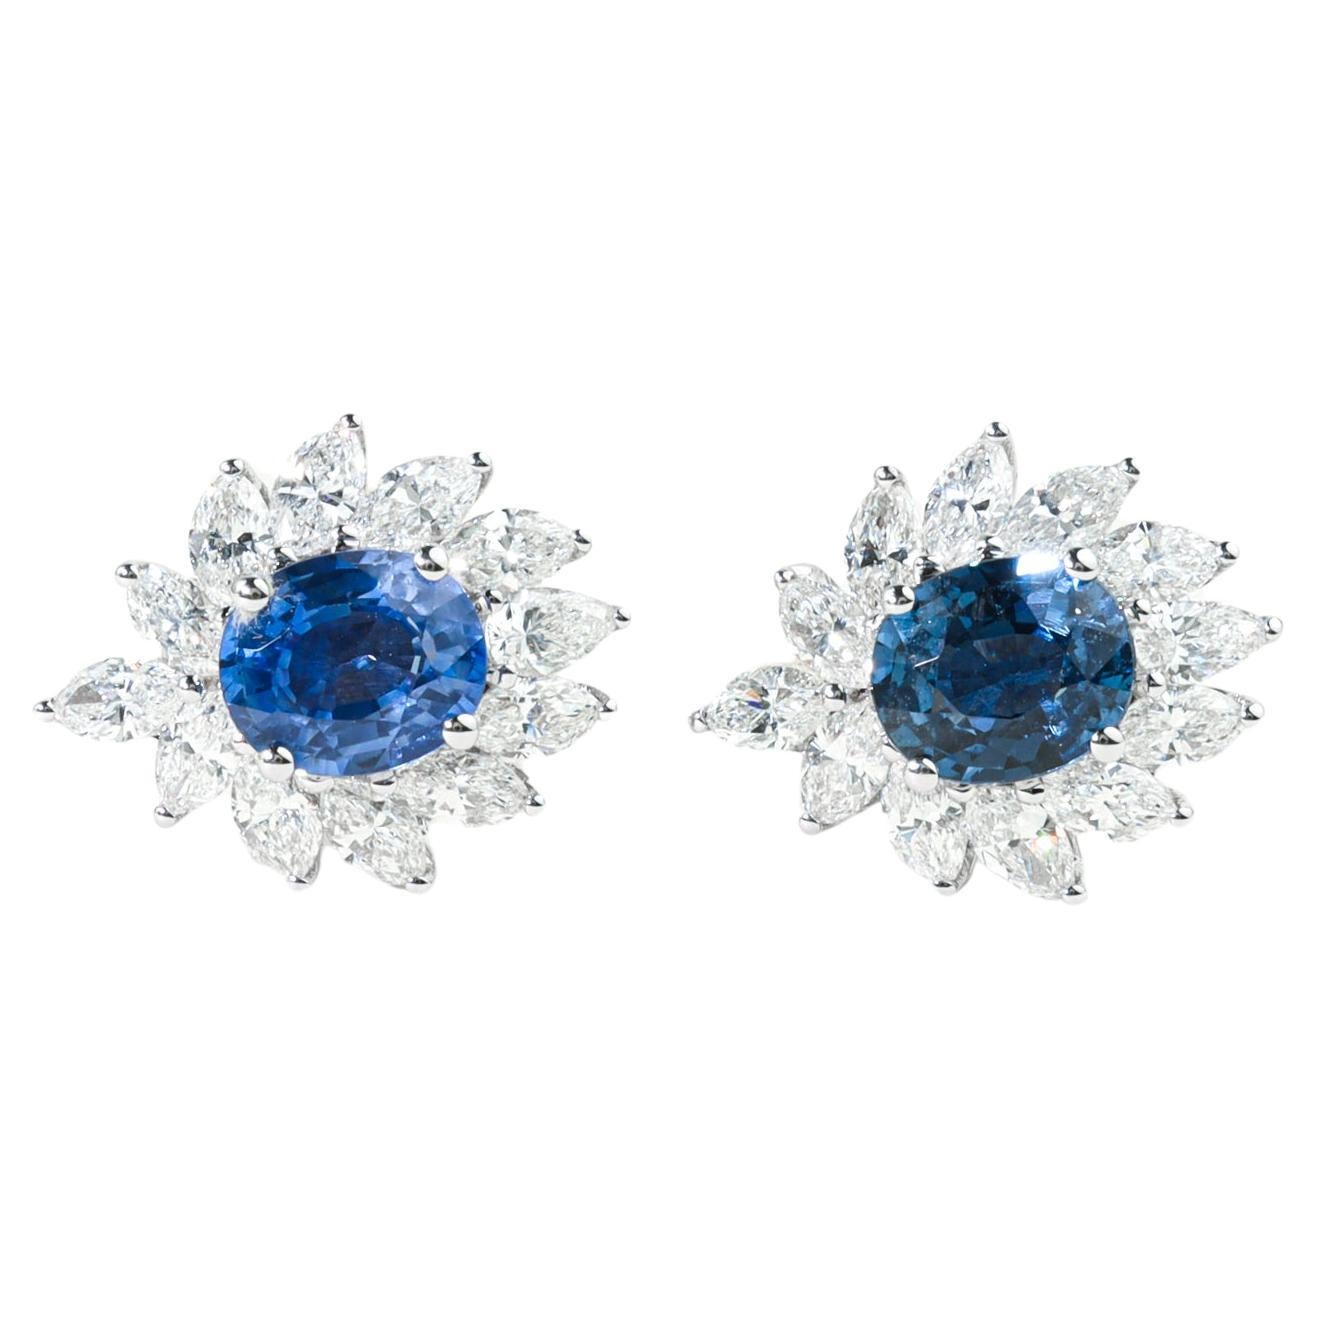 Certified Sapphire Diamond Halo Oval Cut Stud Earrings for her, 18k white gold